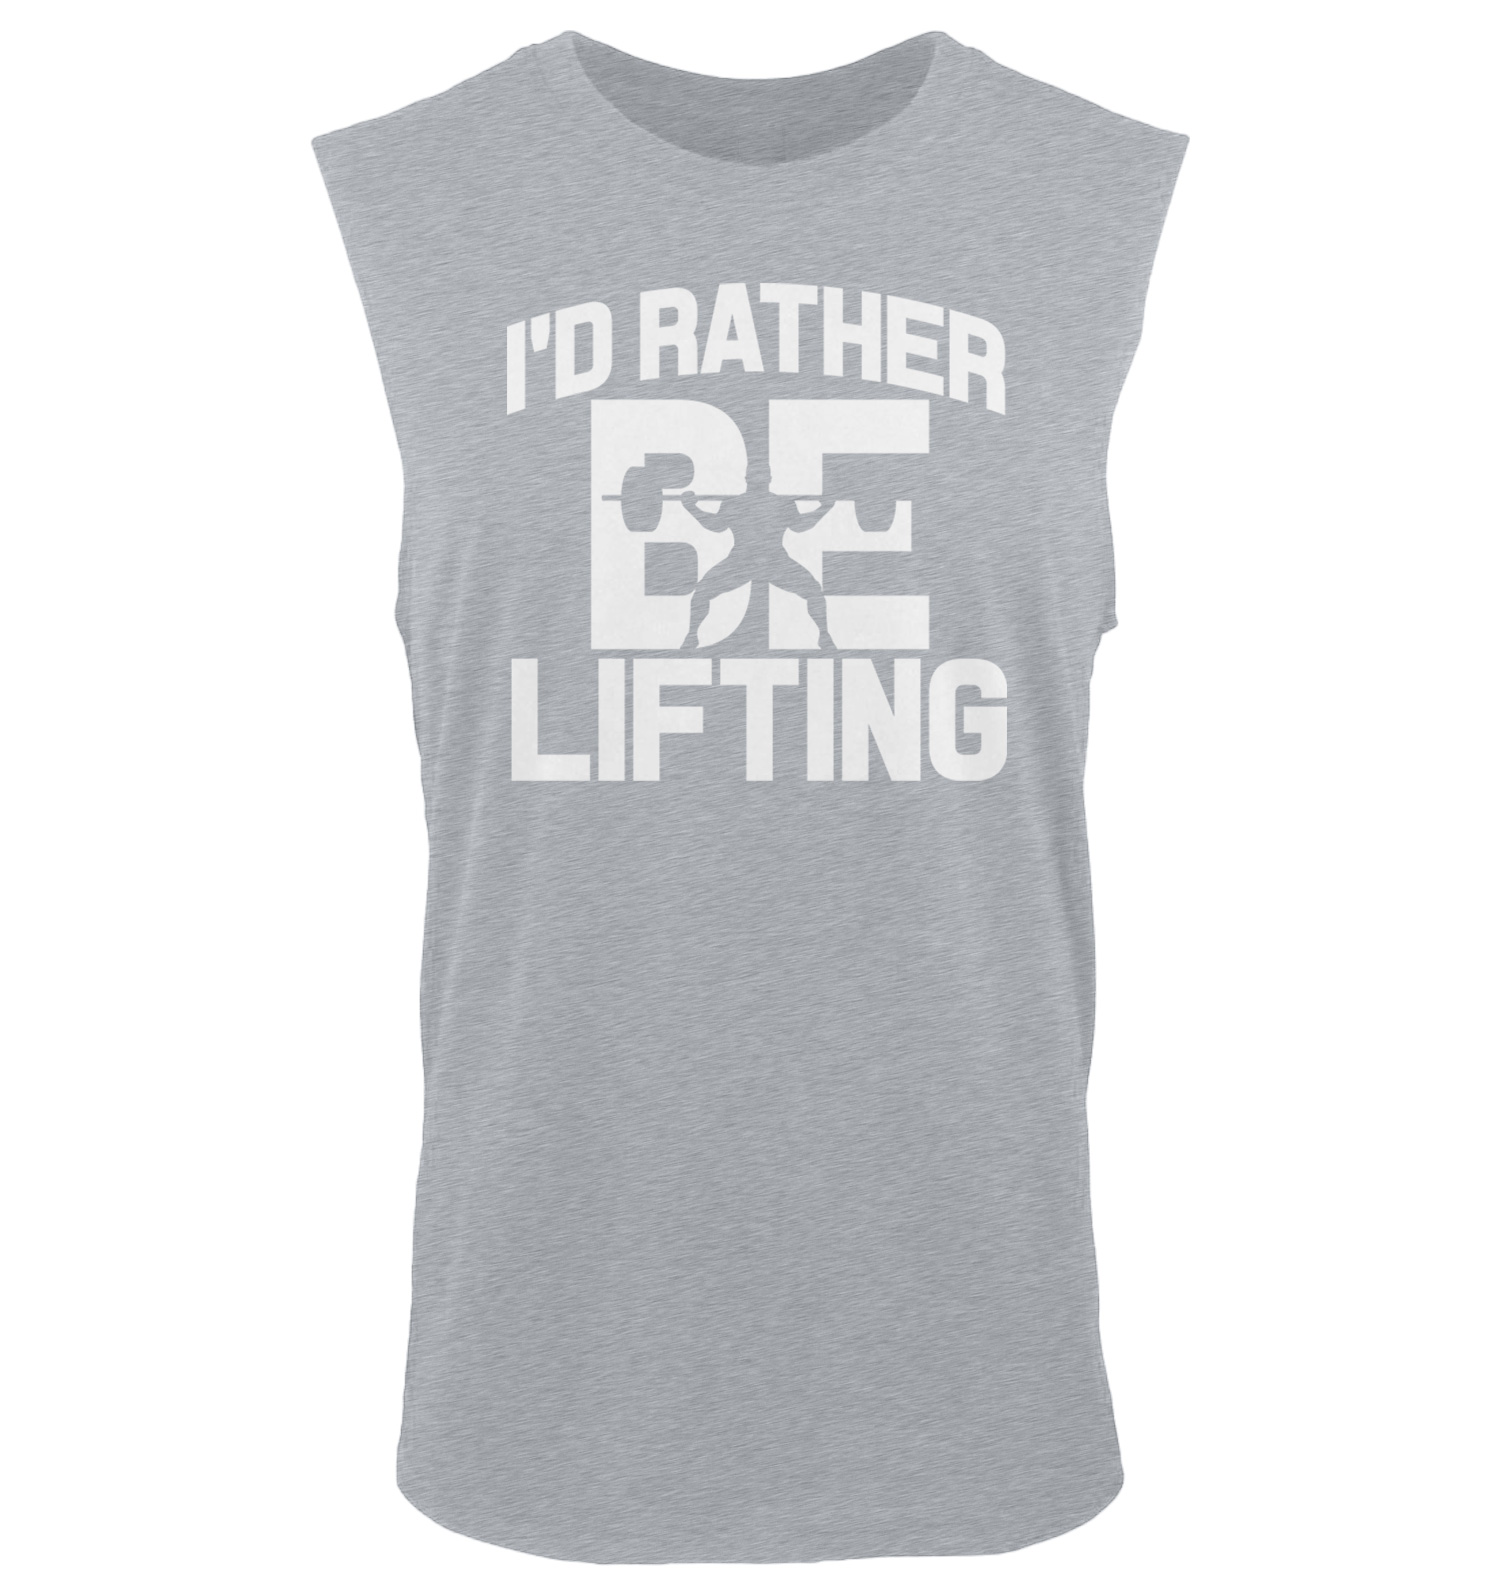 I'd Rather Be Lifting Gym Workout Fitness Men's Tank Top